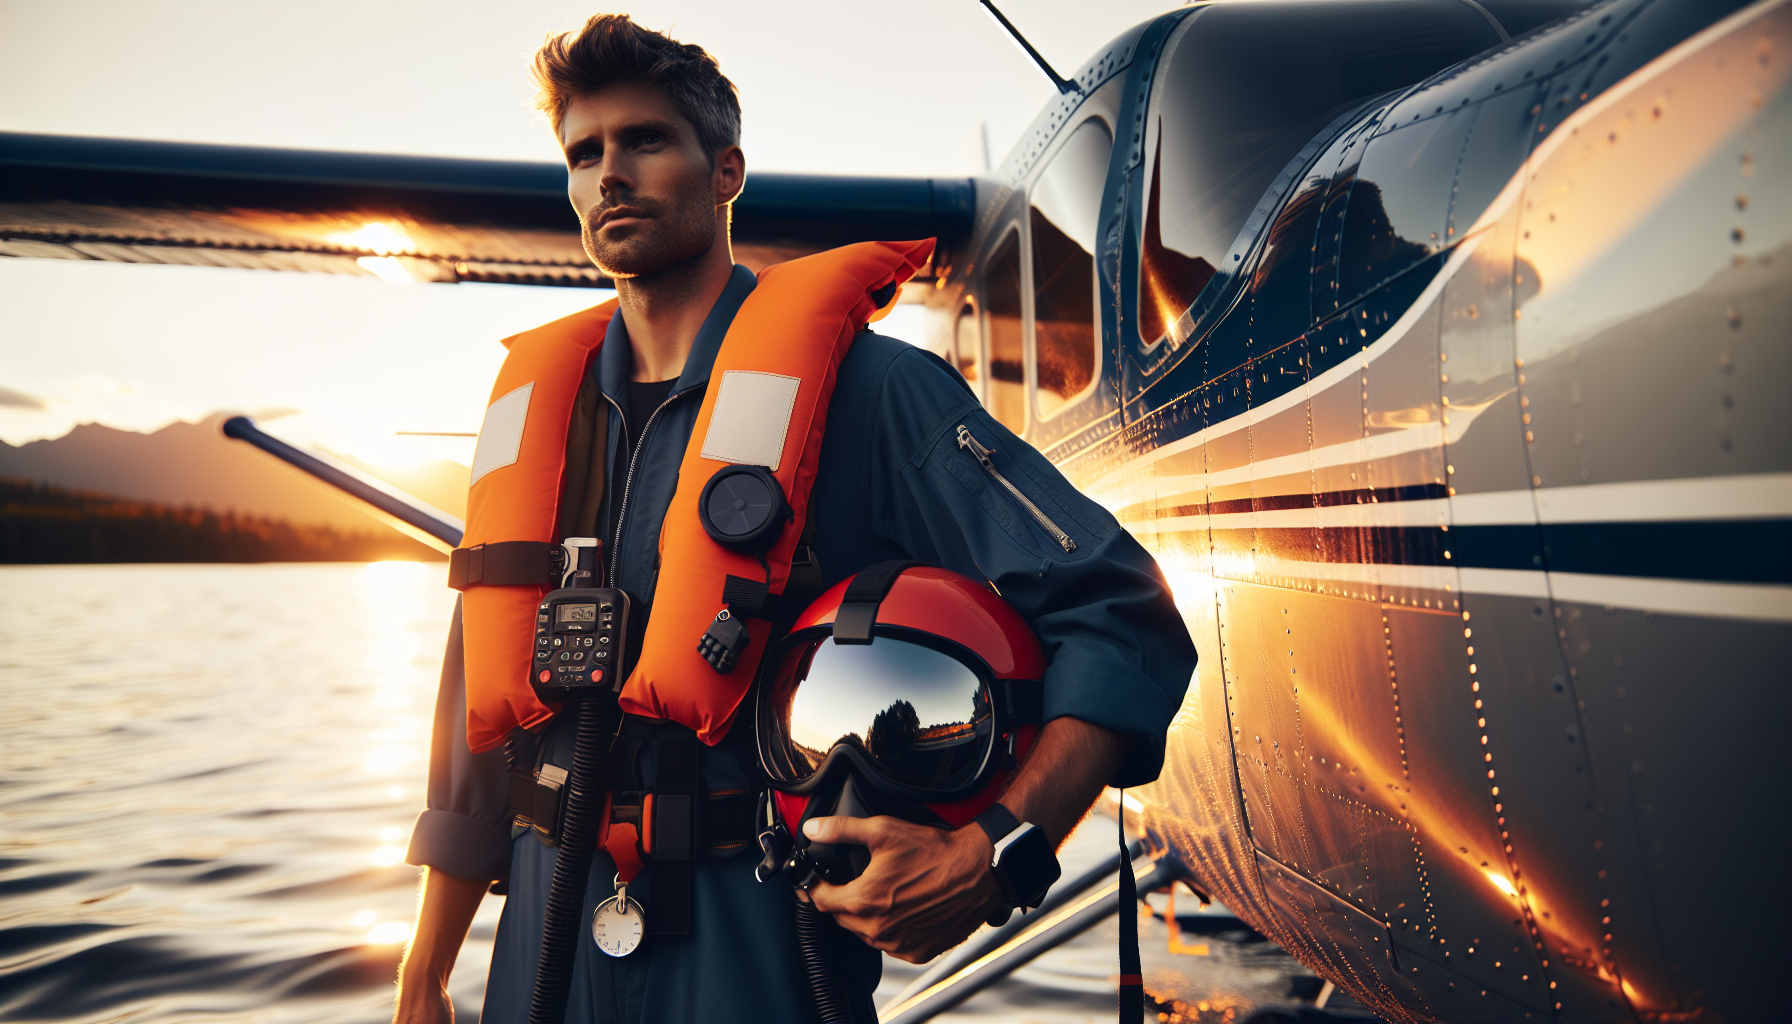 A pilot wearing safety gear for a seaplane adventure